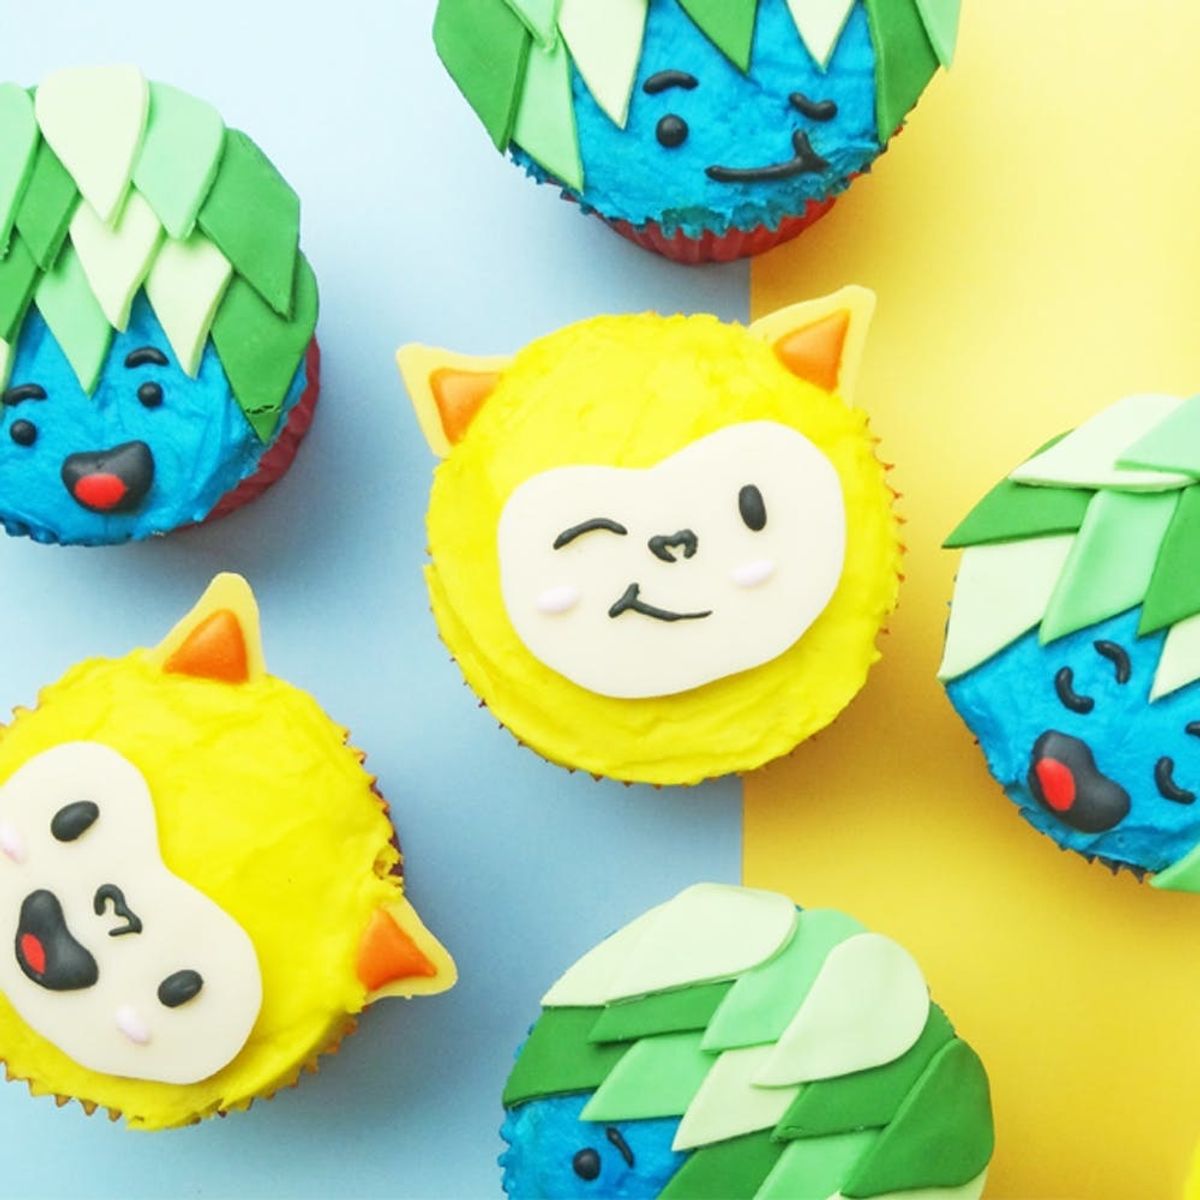 How to Make the Most Adorable Rio Olympics Mascot Cupcakes